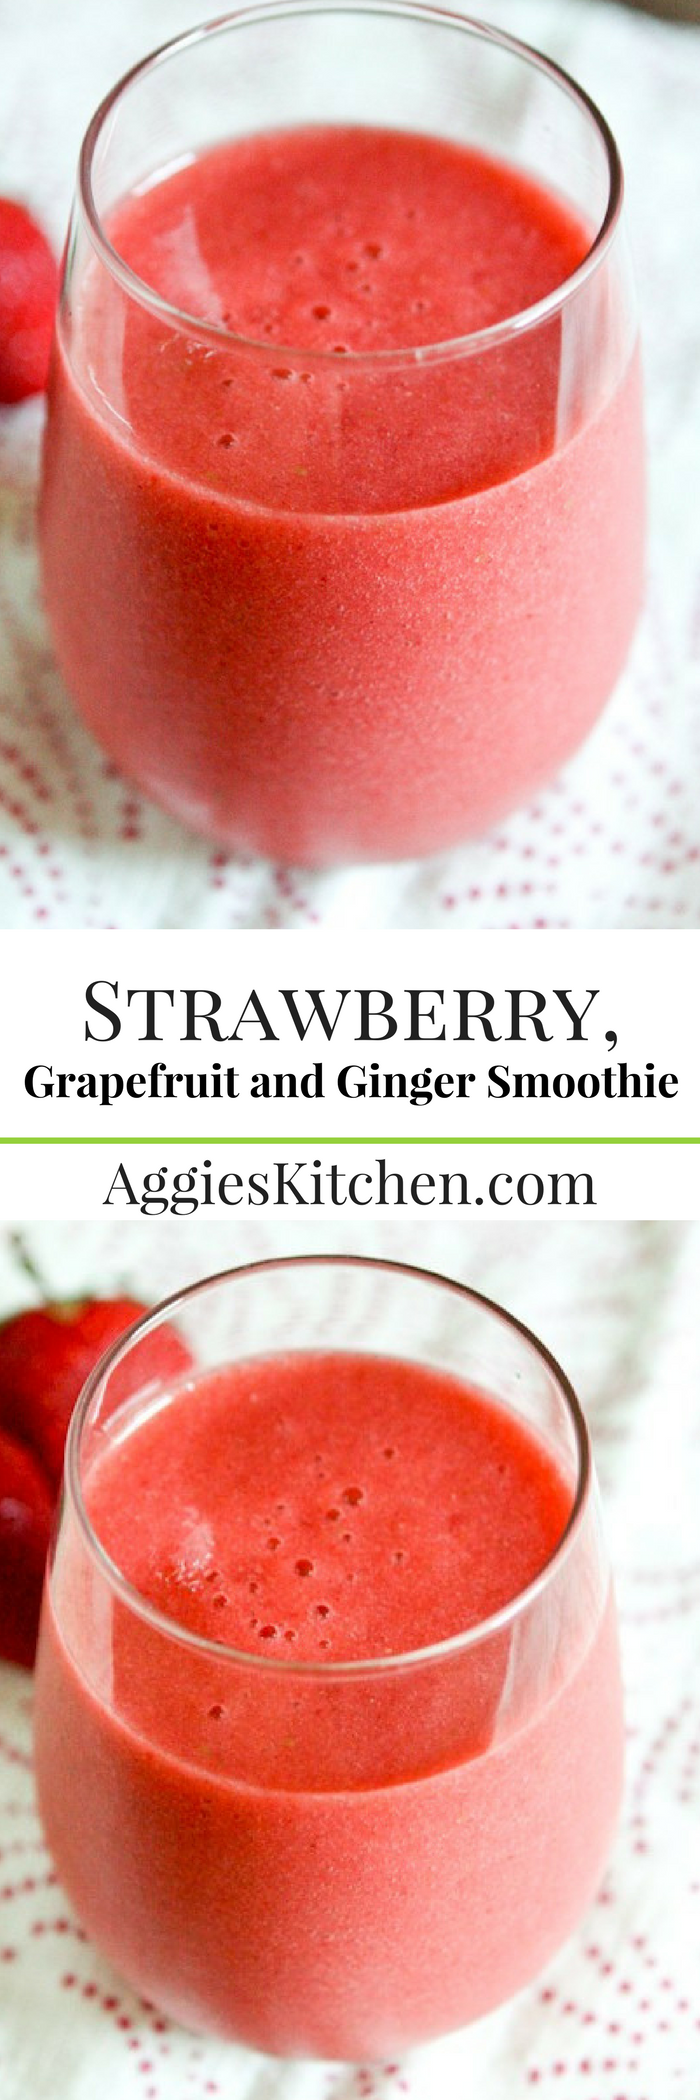 This Strawberry, Grapefruit and Ginger Smoothie will give you a refreshing energy boost any time of day.